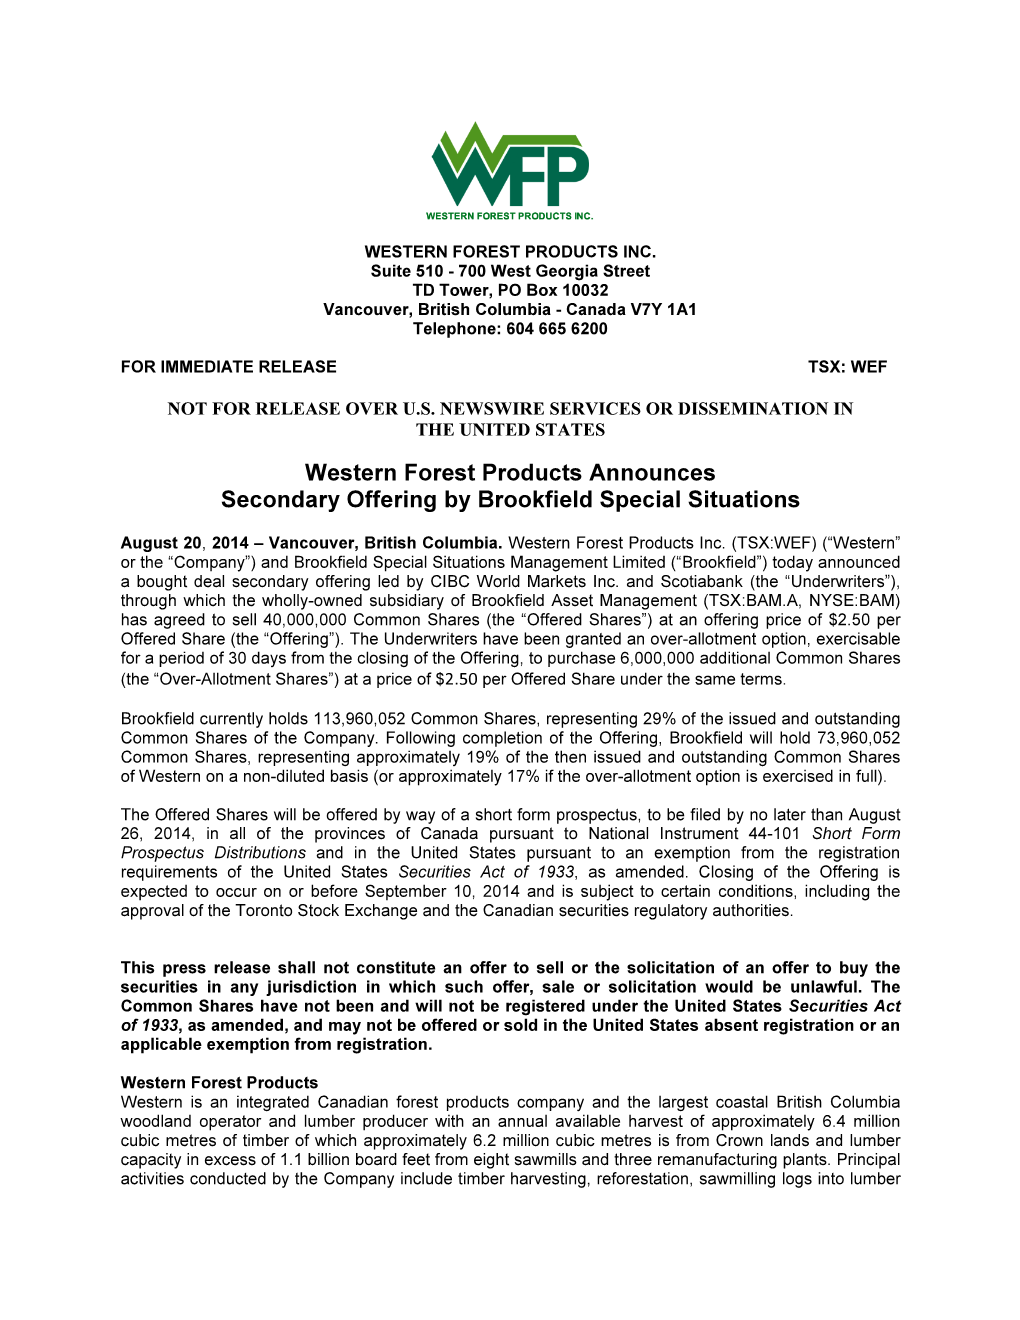 Western Forest Products Announces Secondary Offering by Brookfield Special Situations